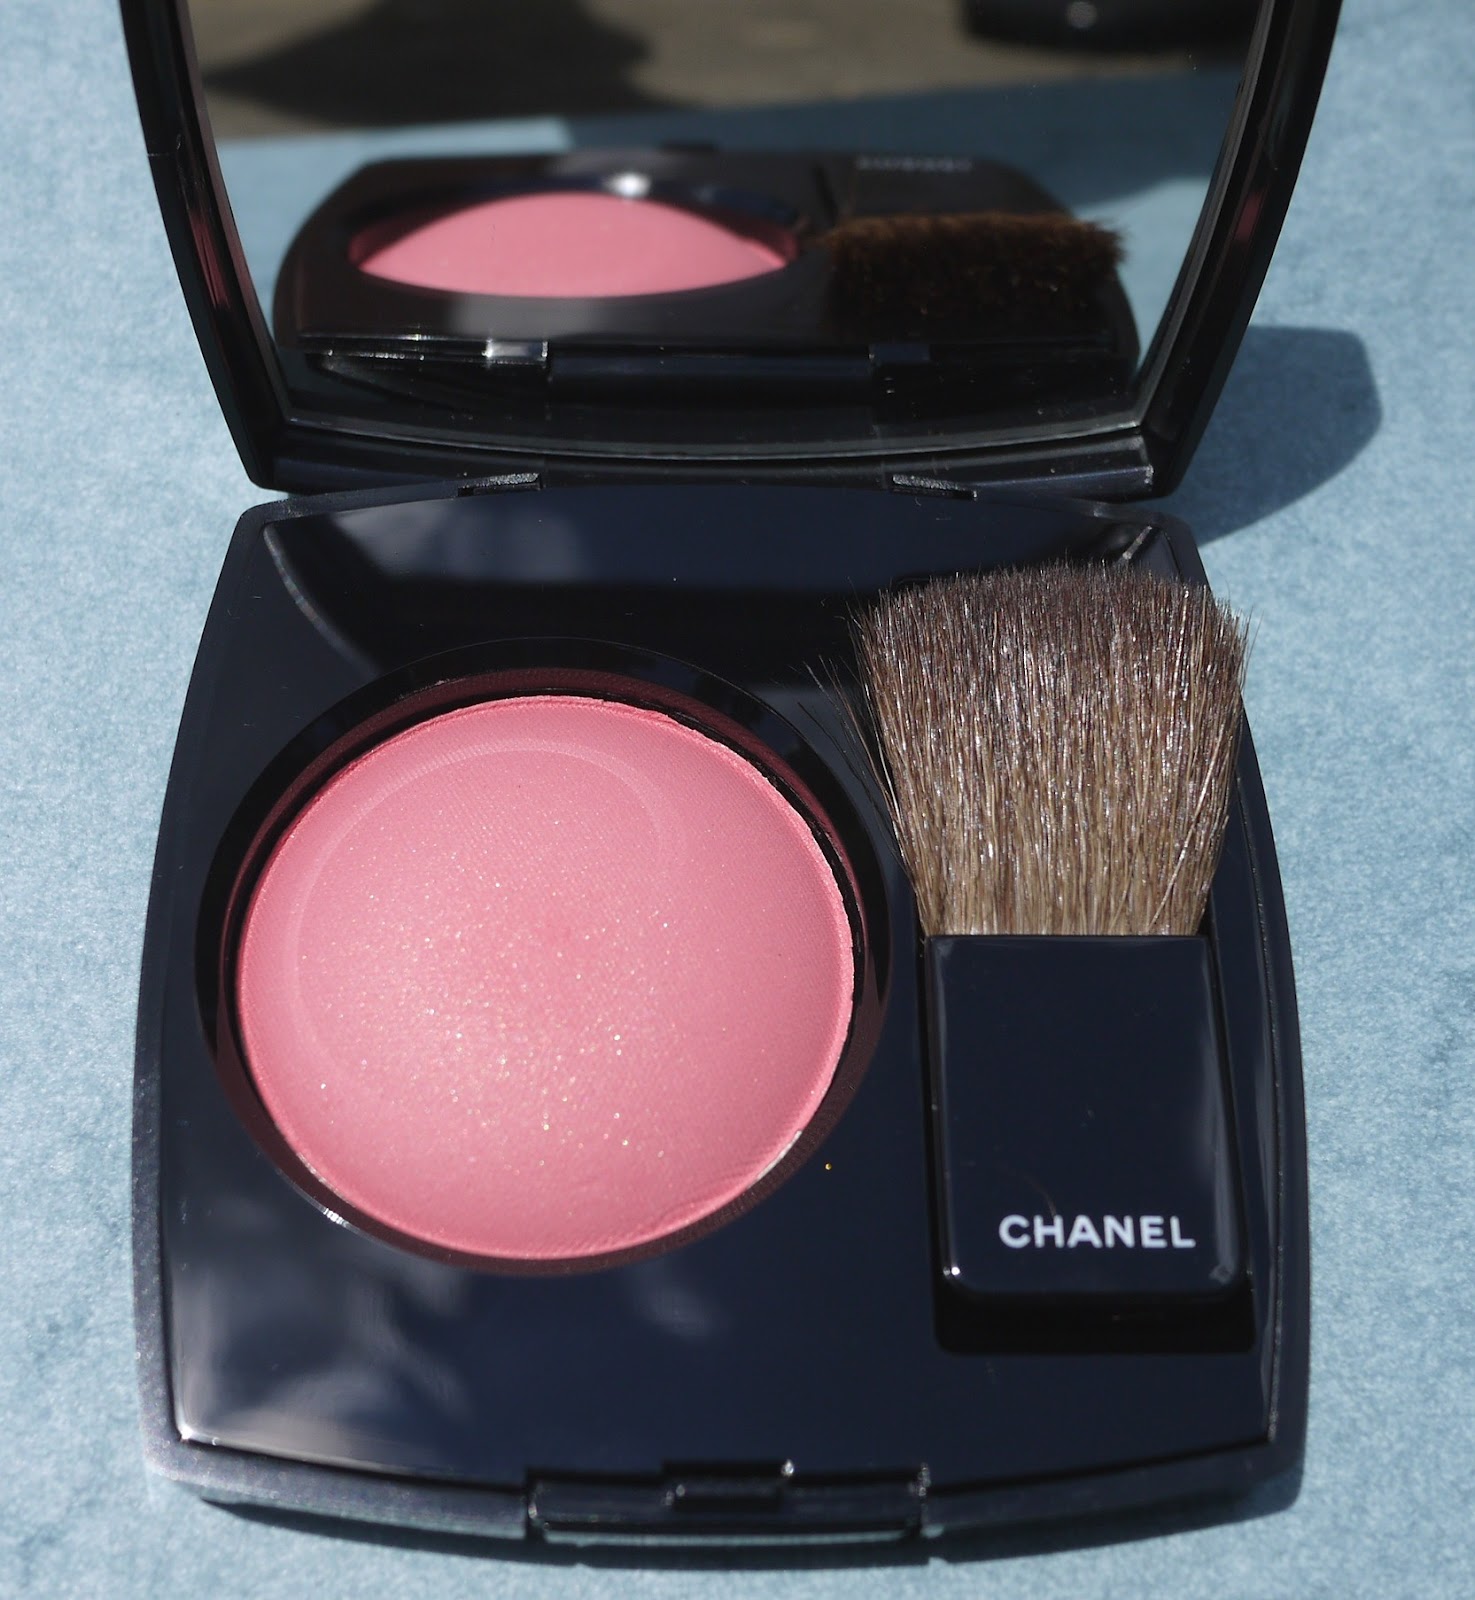 Things in Beauty: Chanel Rose Initiale Joues Contraste Powder Blush from Les Essentials Chanel Collection for Fall